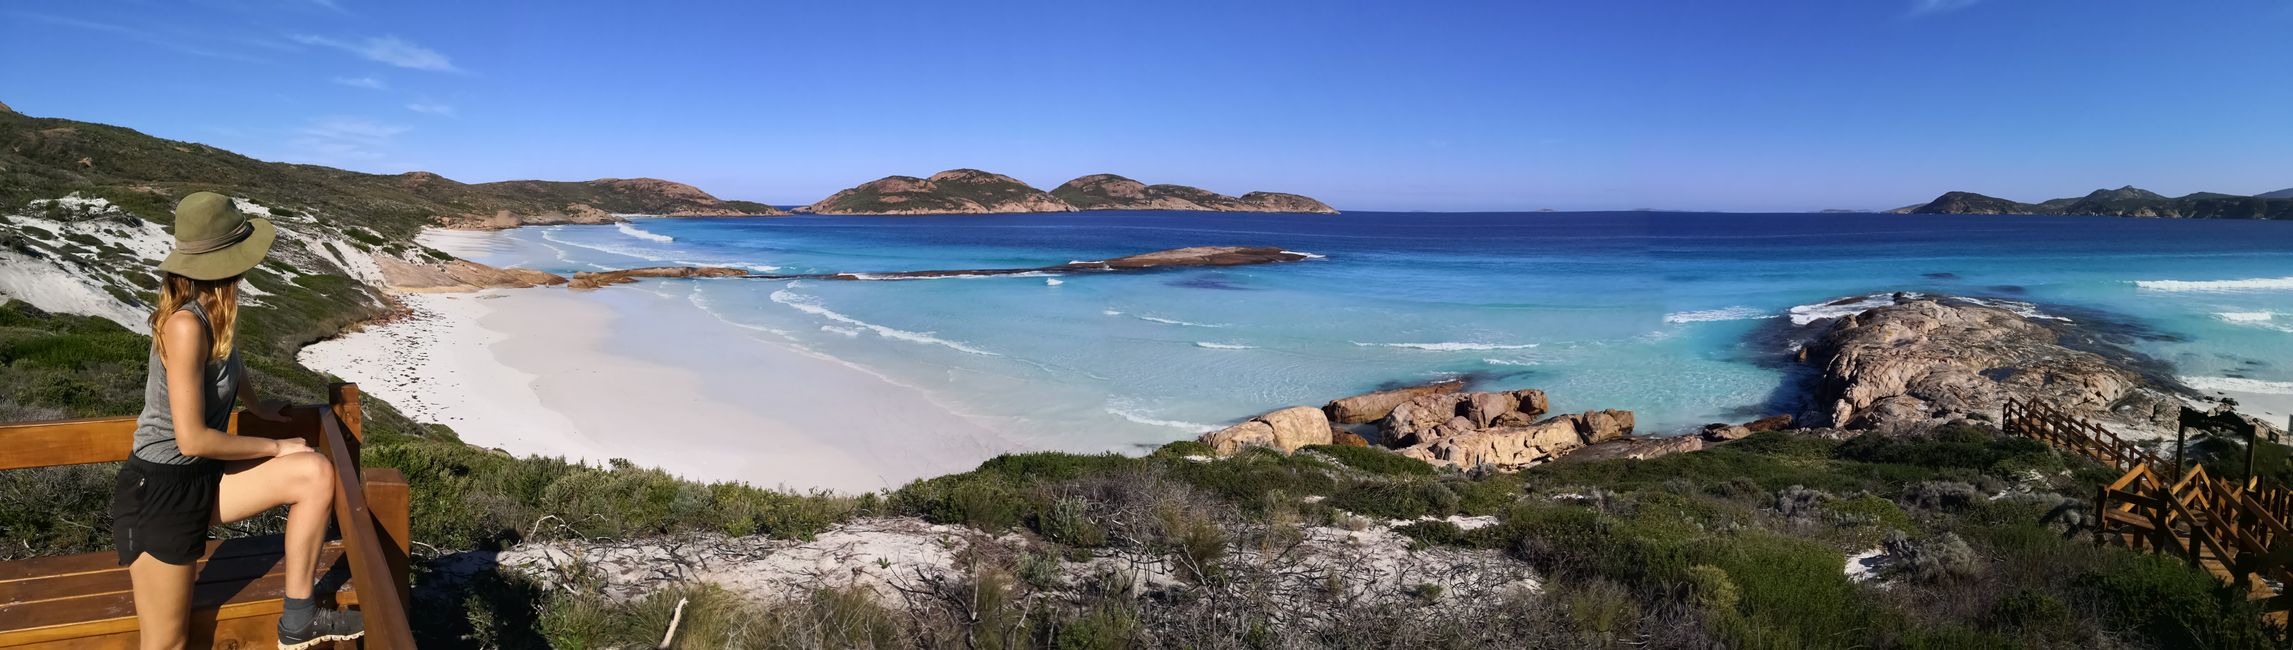 dreamy shades of blue in Lucky Bay